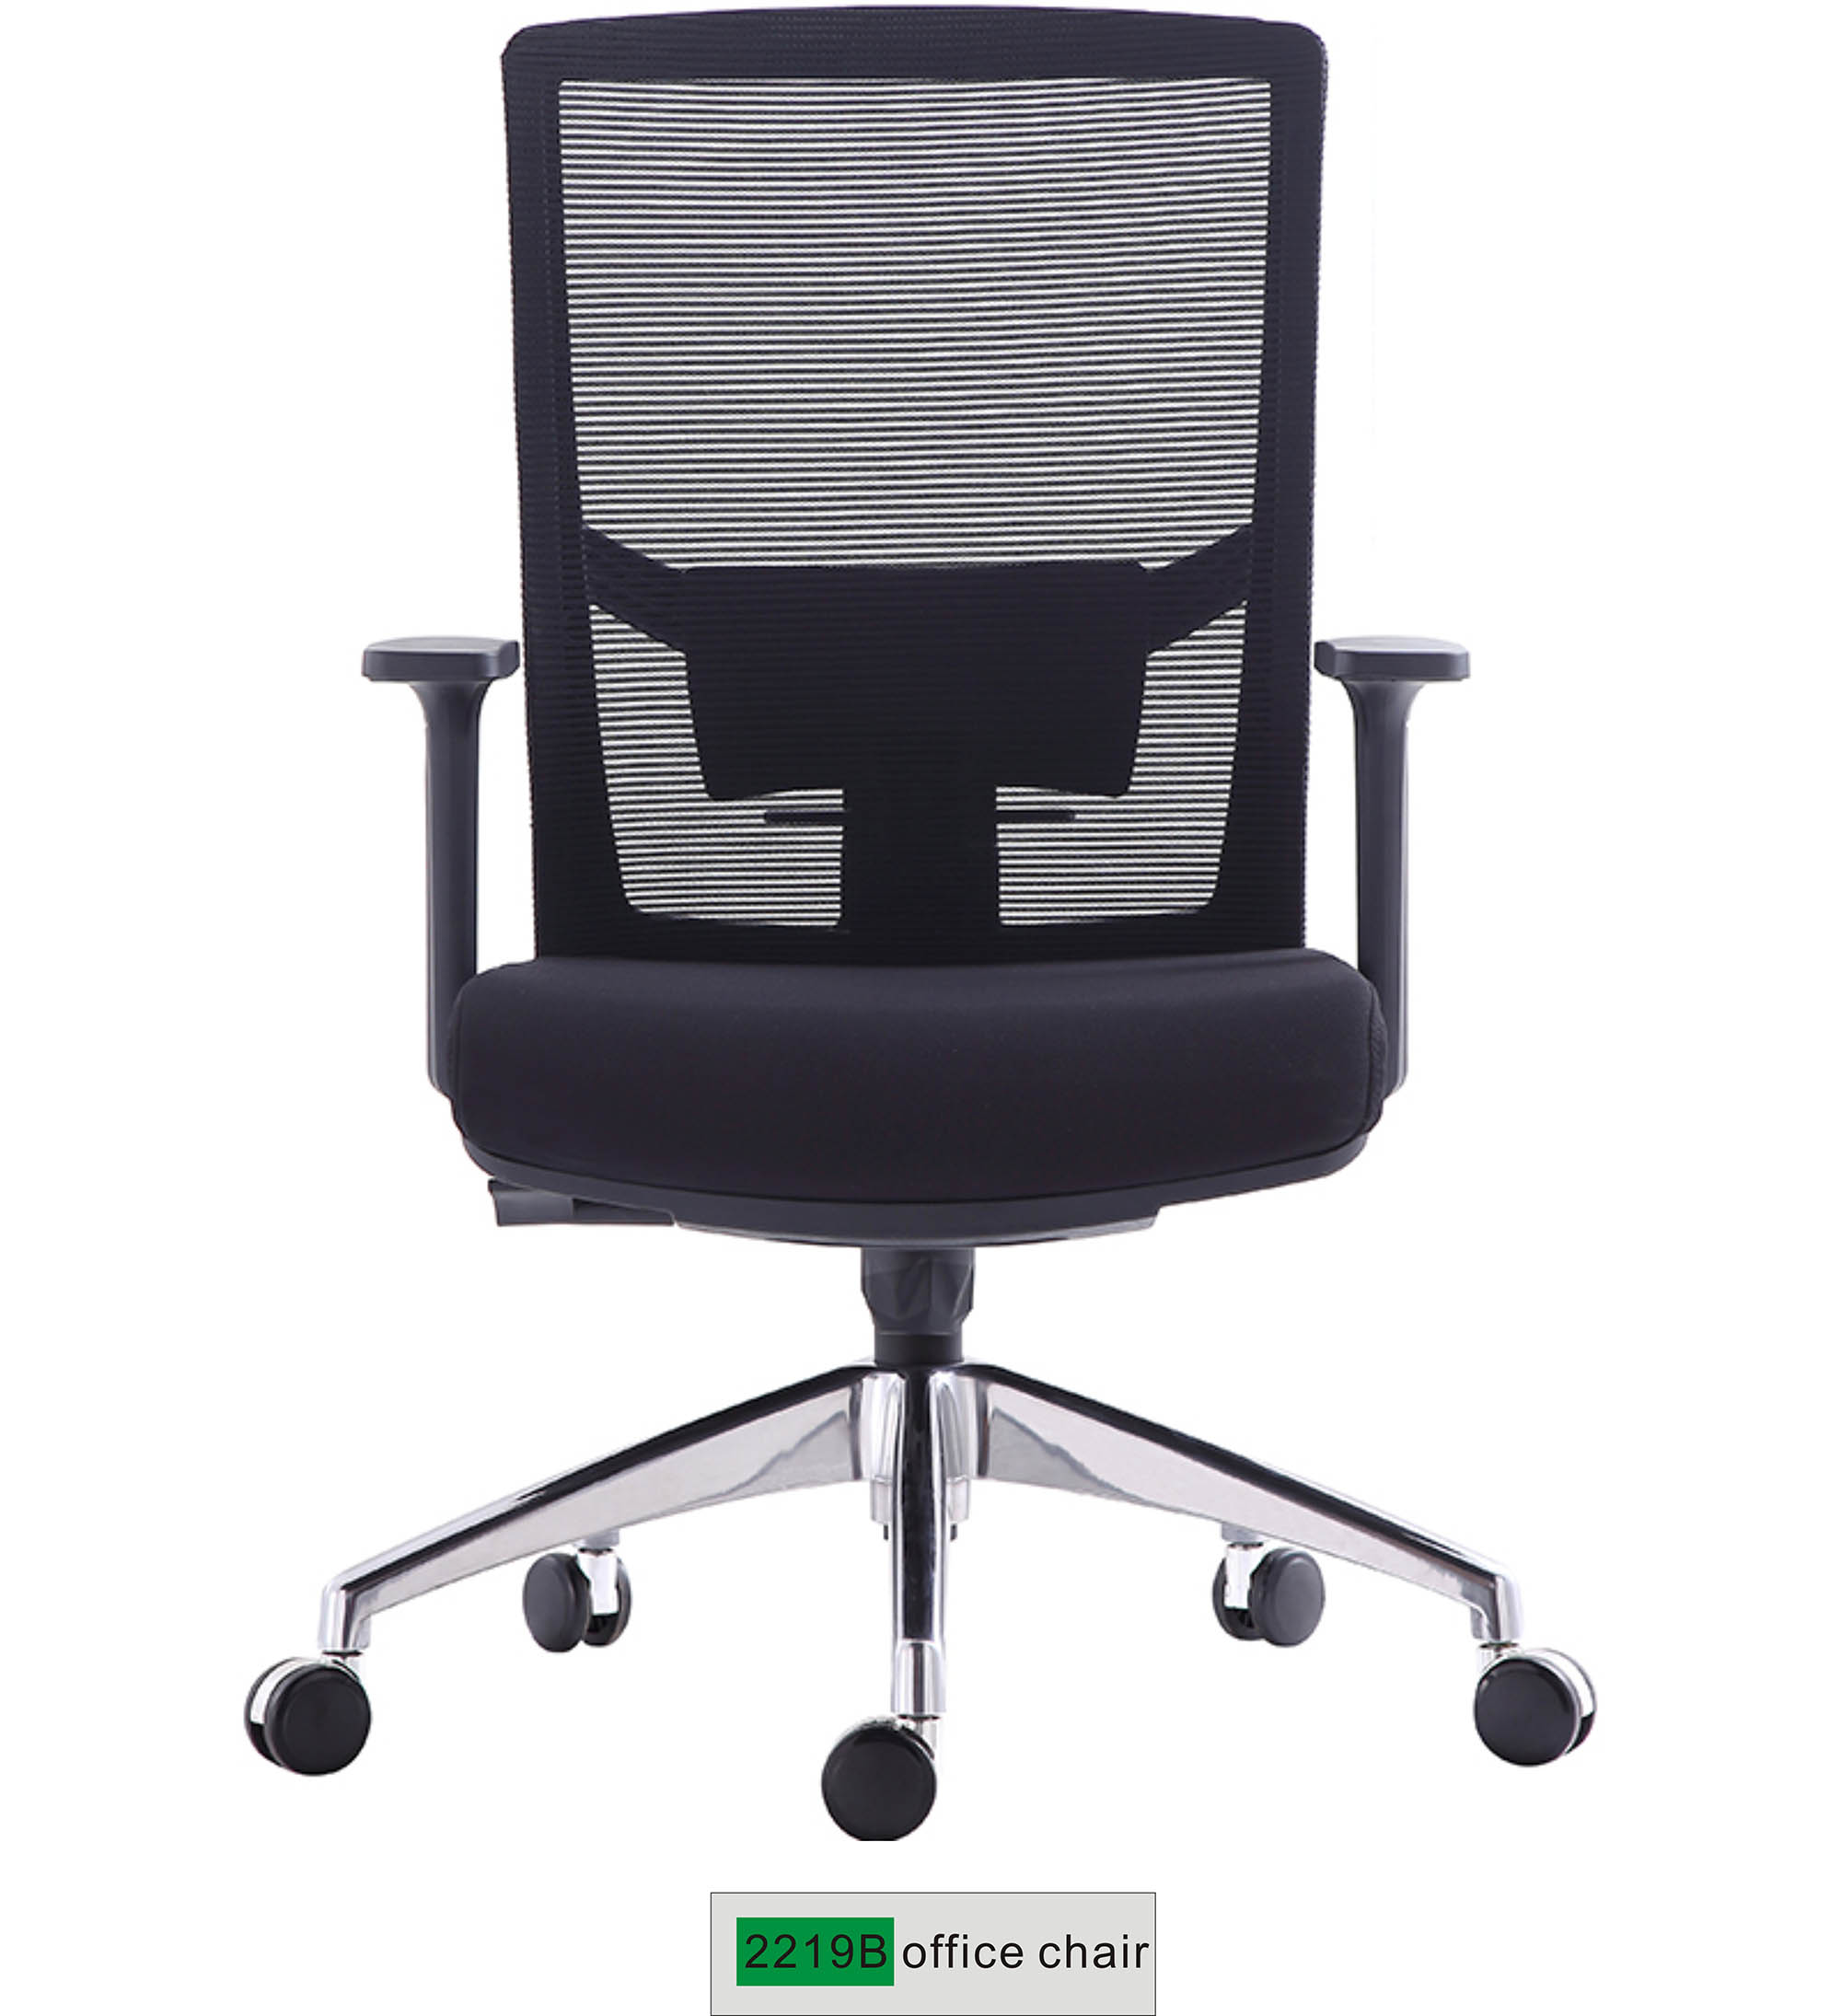  Ergonomic Office Chair with Lumbar Support 2219B